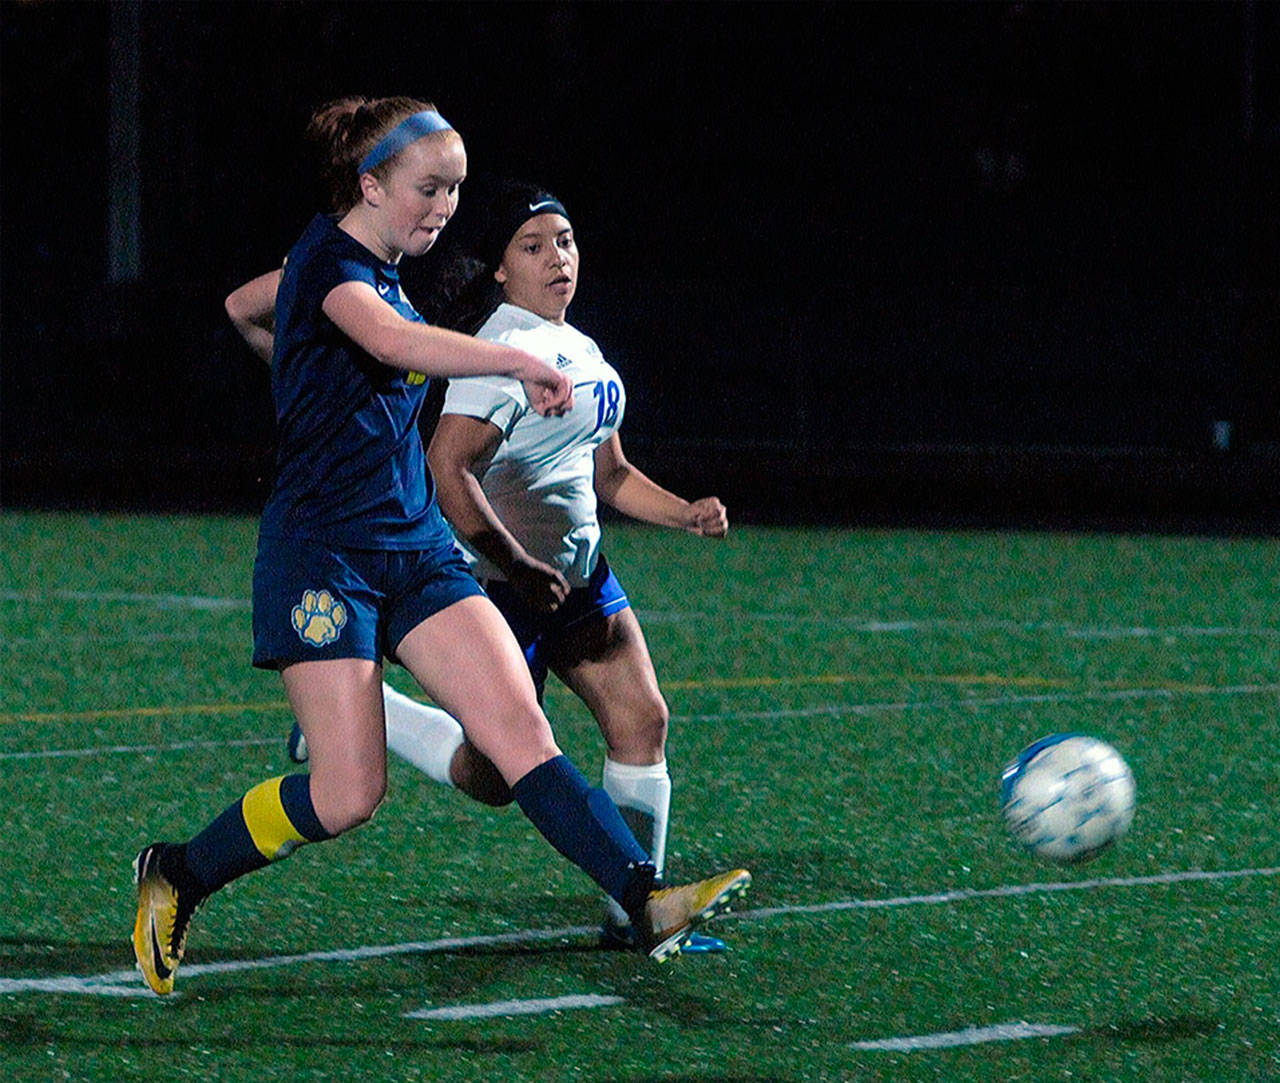 Aberdeen’s Emmy Walsh takes a shot on goal in the second half of a game against Rochester on Tuesday night. Walsh scored the eventual game-winning goal in the 45th minute. (Hasani Grayson | Grays Harbor News Group)